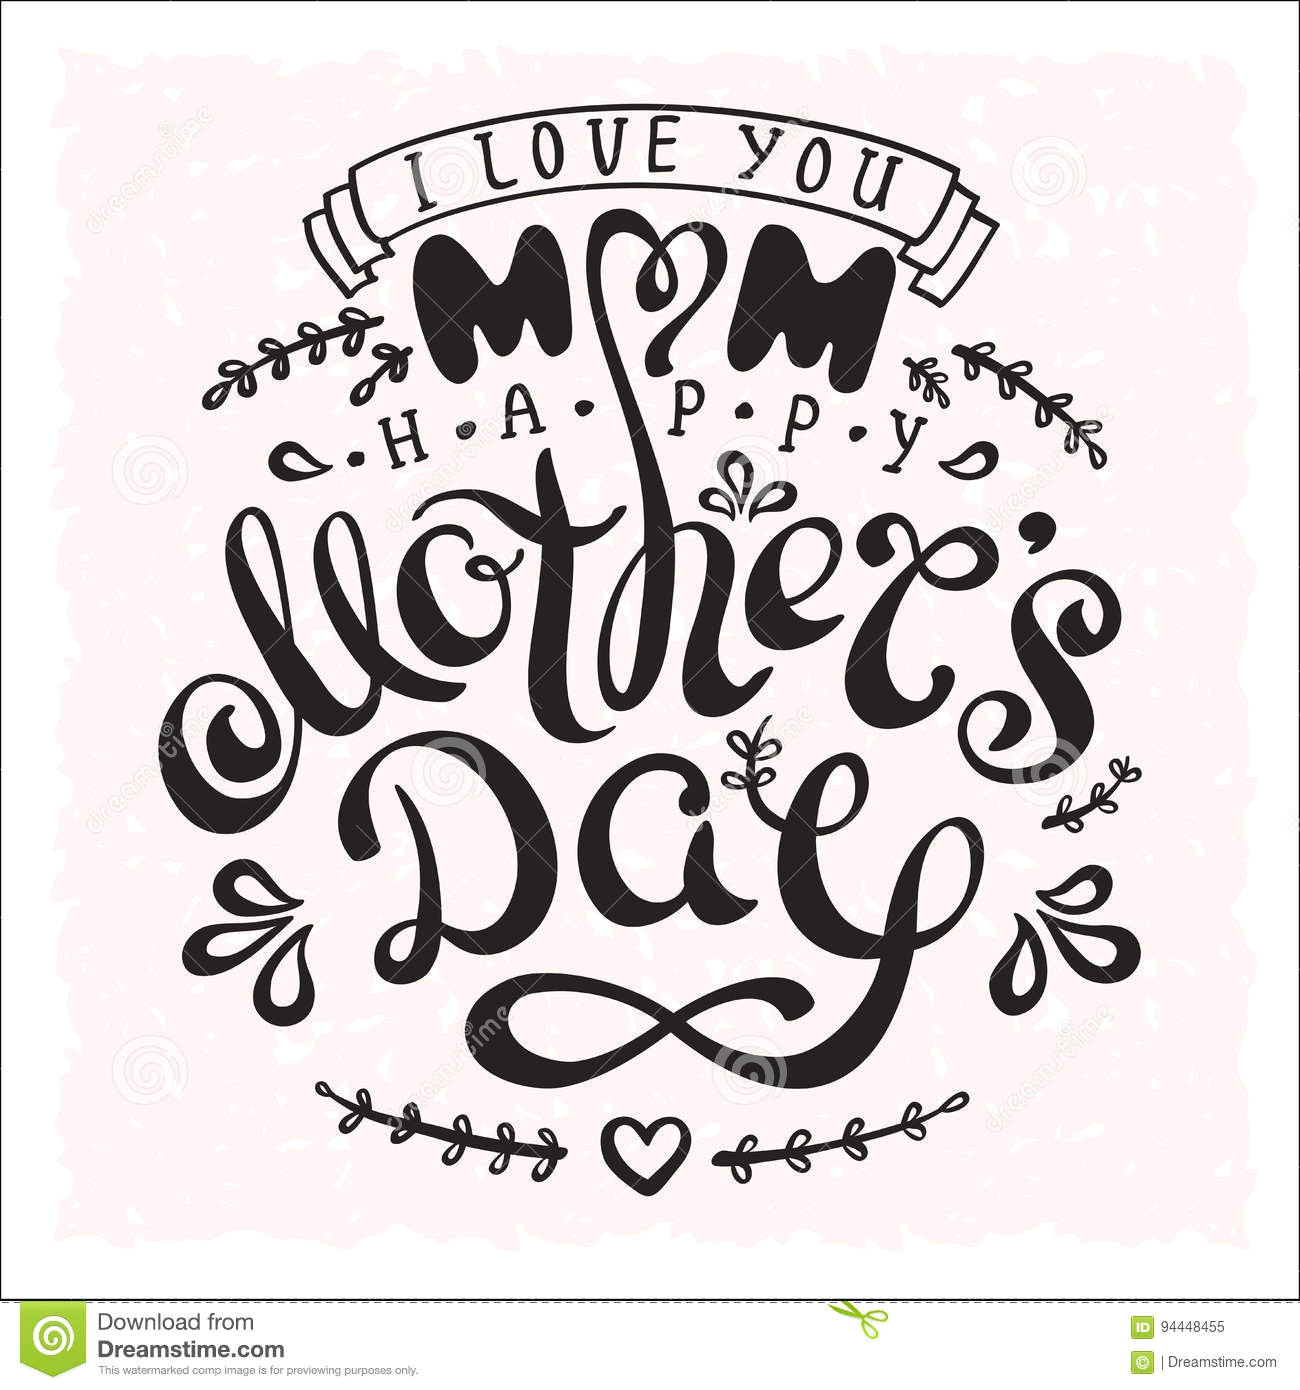 Drawings Of Flowers for Mother S Day Handwriting Phrase Happy Mothers Day with Drawn Flowers and Heart